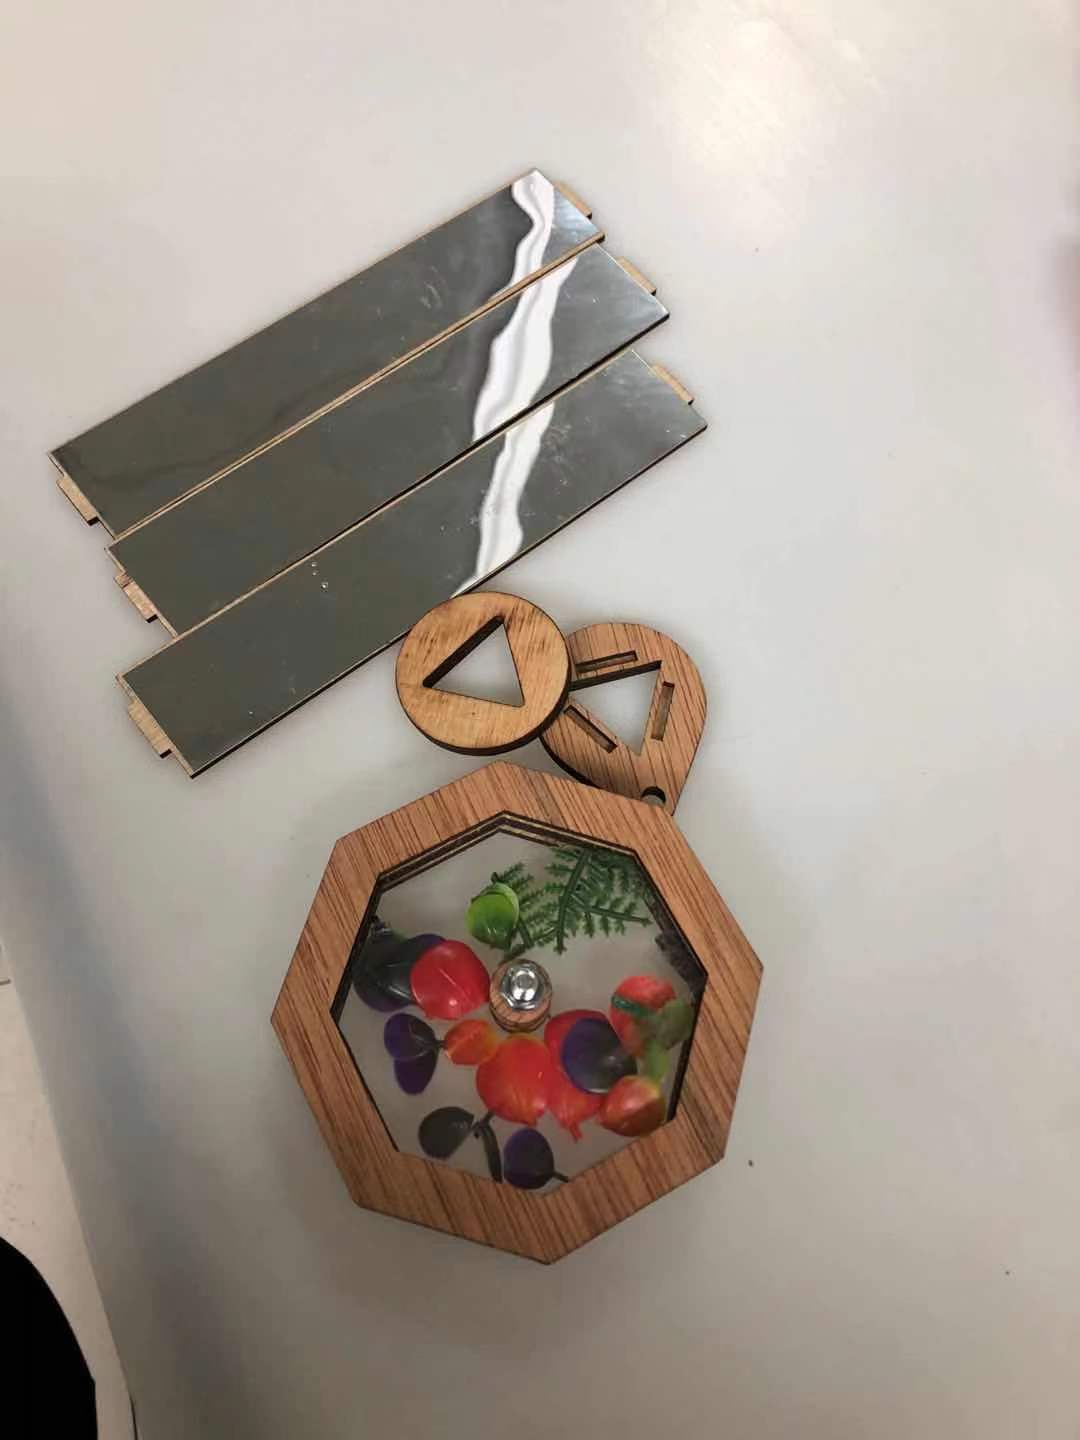 Open your mind to exciting new projects. This wood rotating kaleidoscope kit is fun to put together and fun to play with as well as a new educational toy. Fun for everyone, boys and girls of all ages. Use all sorts of interesting things to create fun new designs with a never ending opportunity for fun.